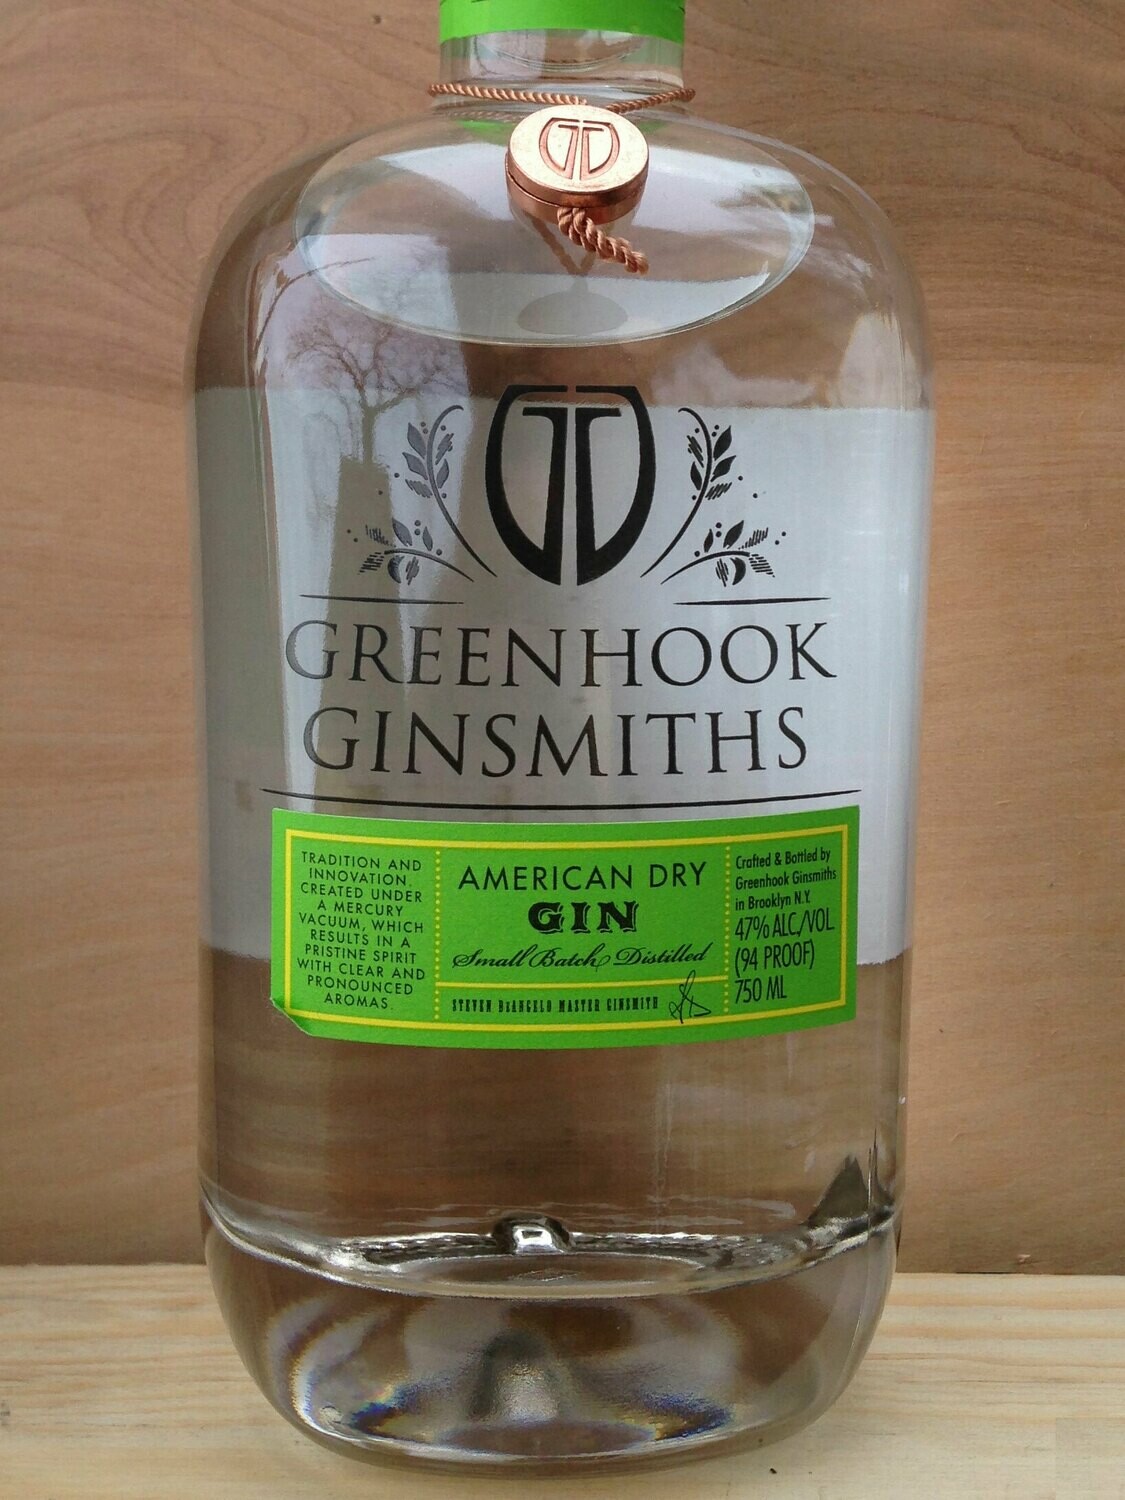 American Dry Gin Greenhook Ginsmiths